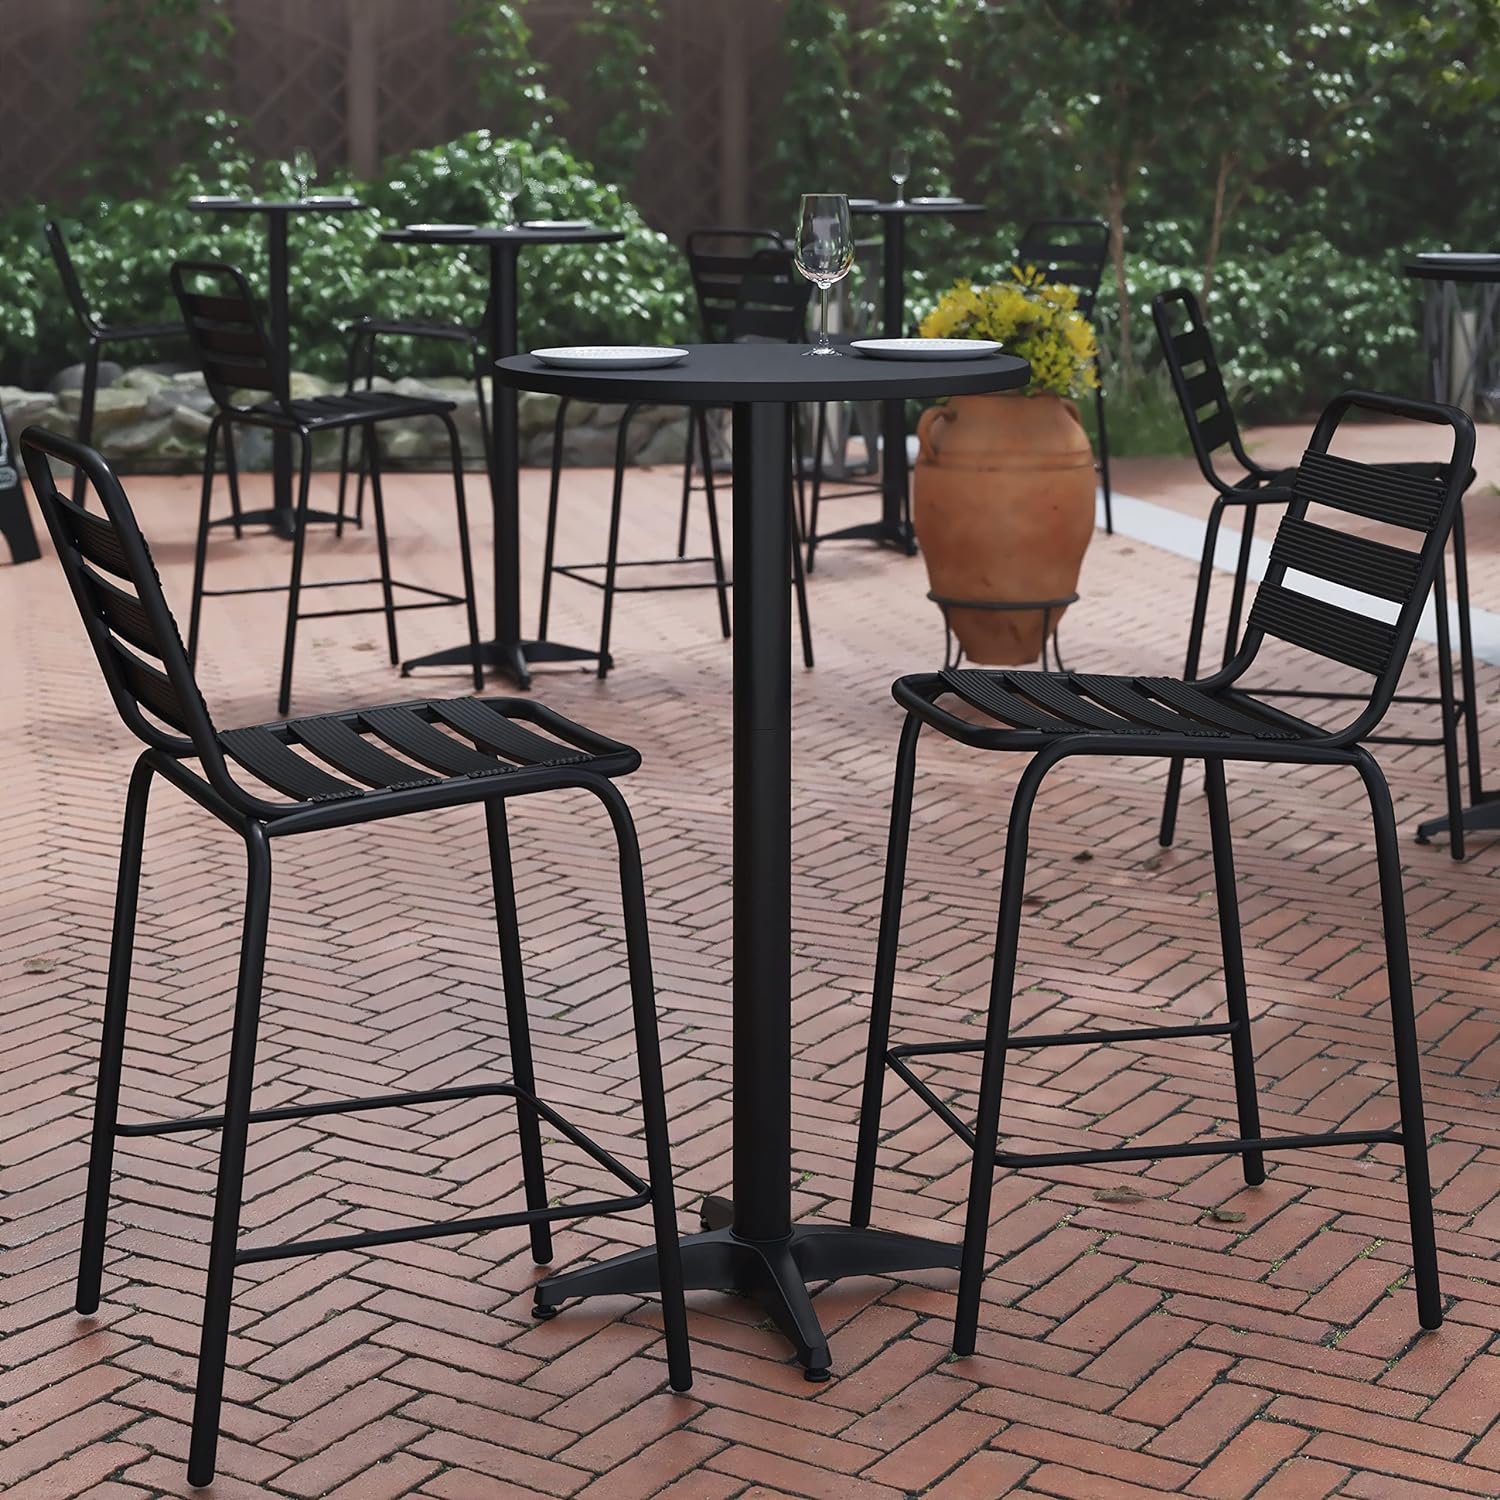 Restaurant Outdoor Furniture Buying Guide